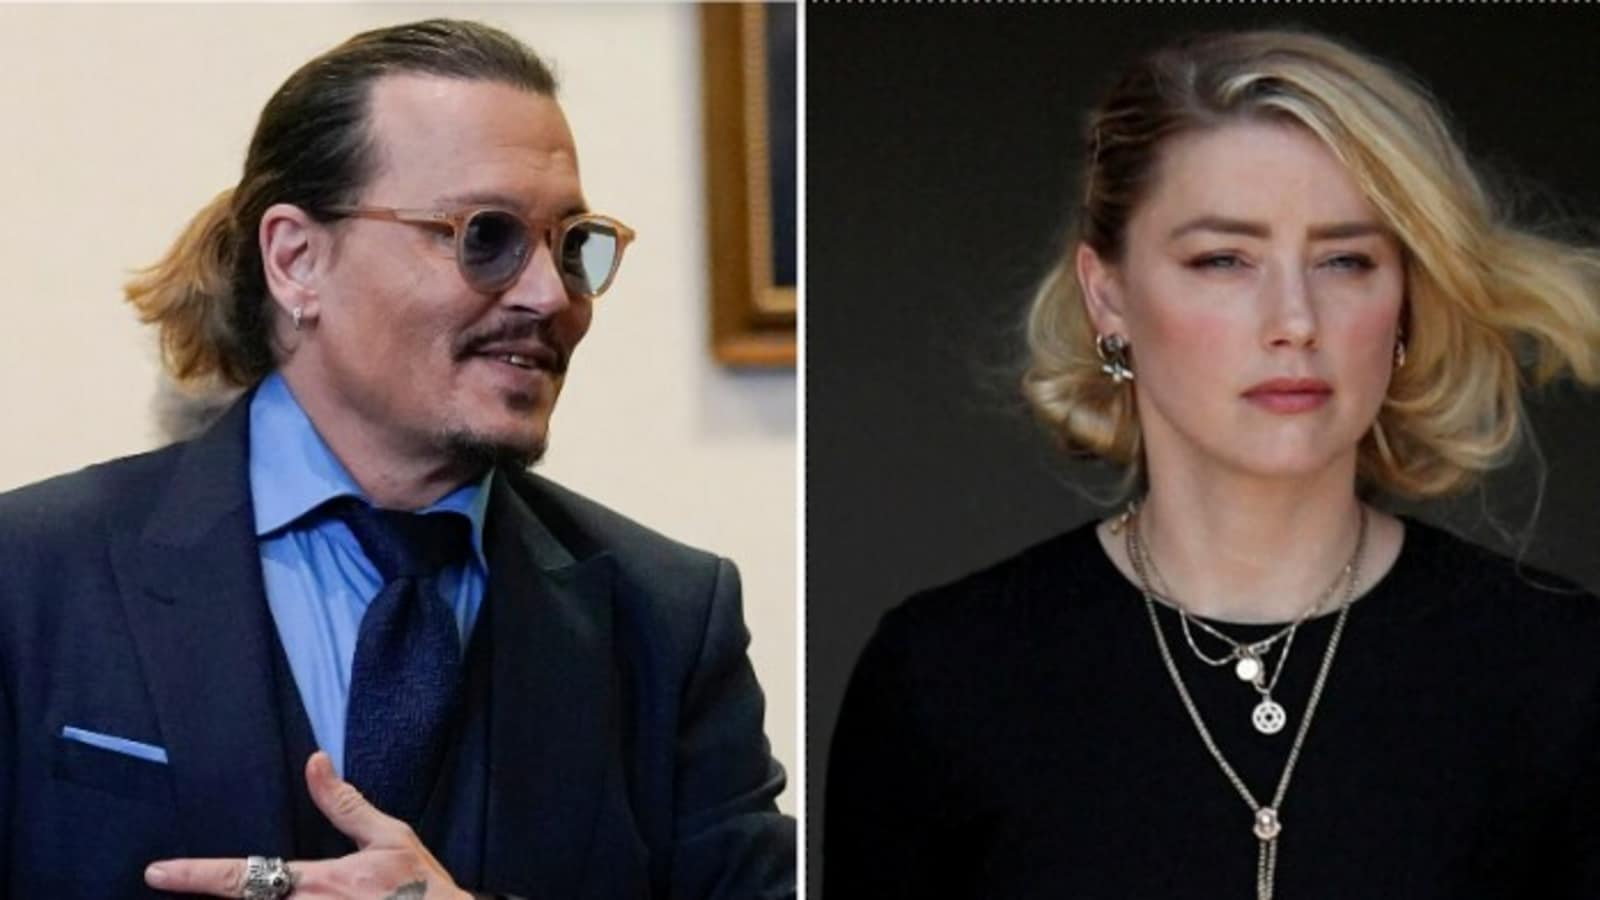 Amber Heard reacts to Johnny Depp’s TikTok debut after defamation trial